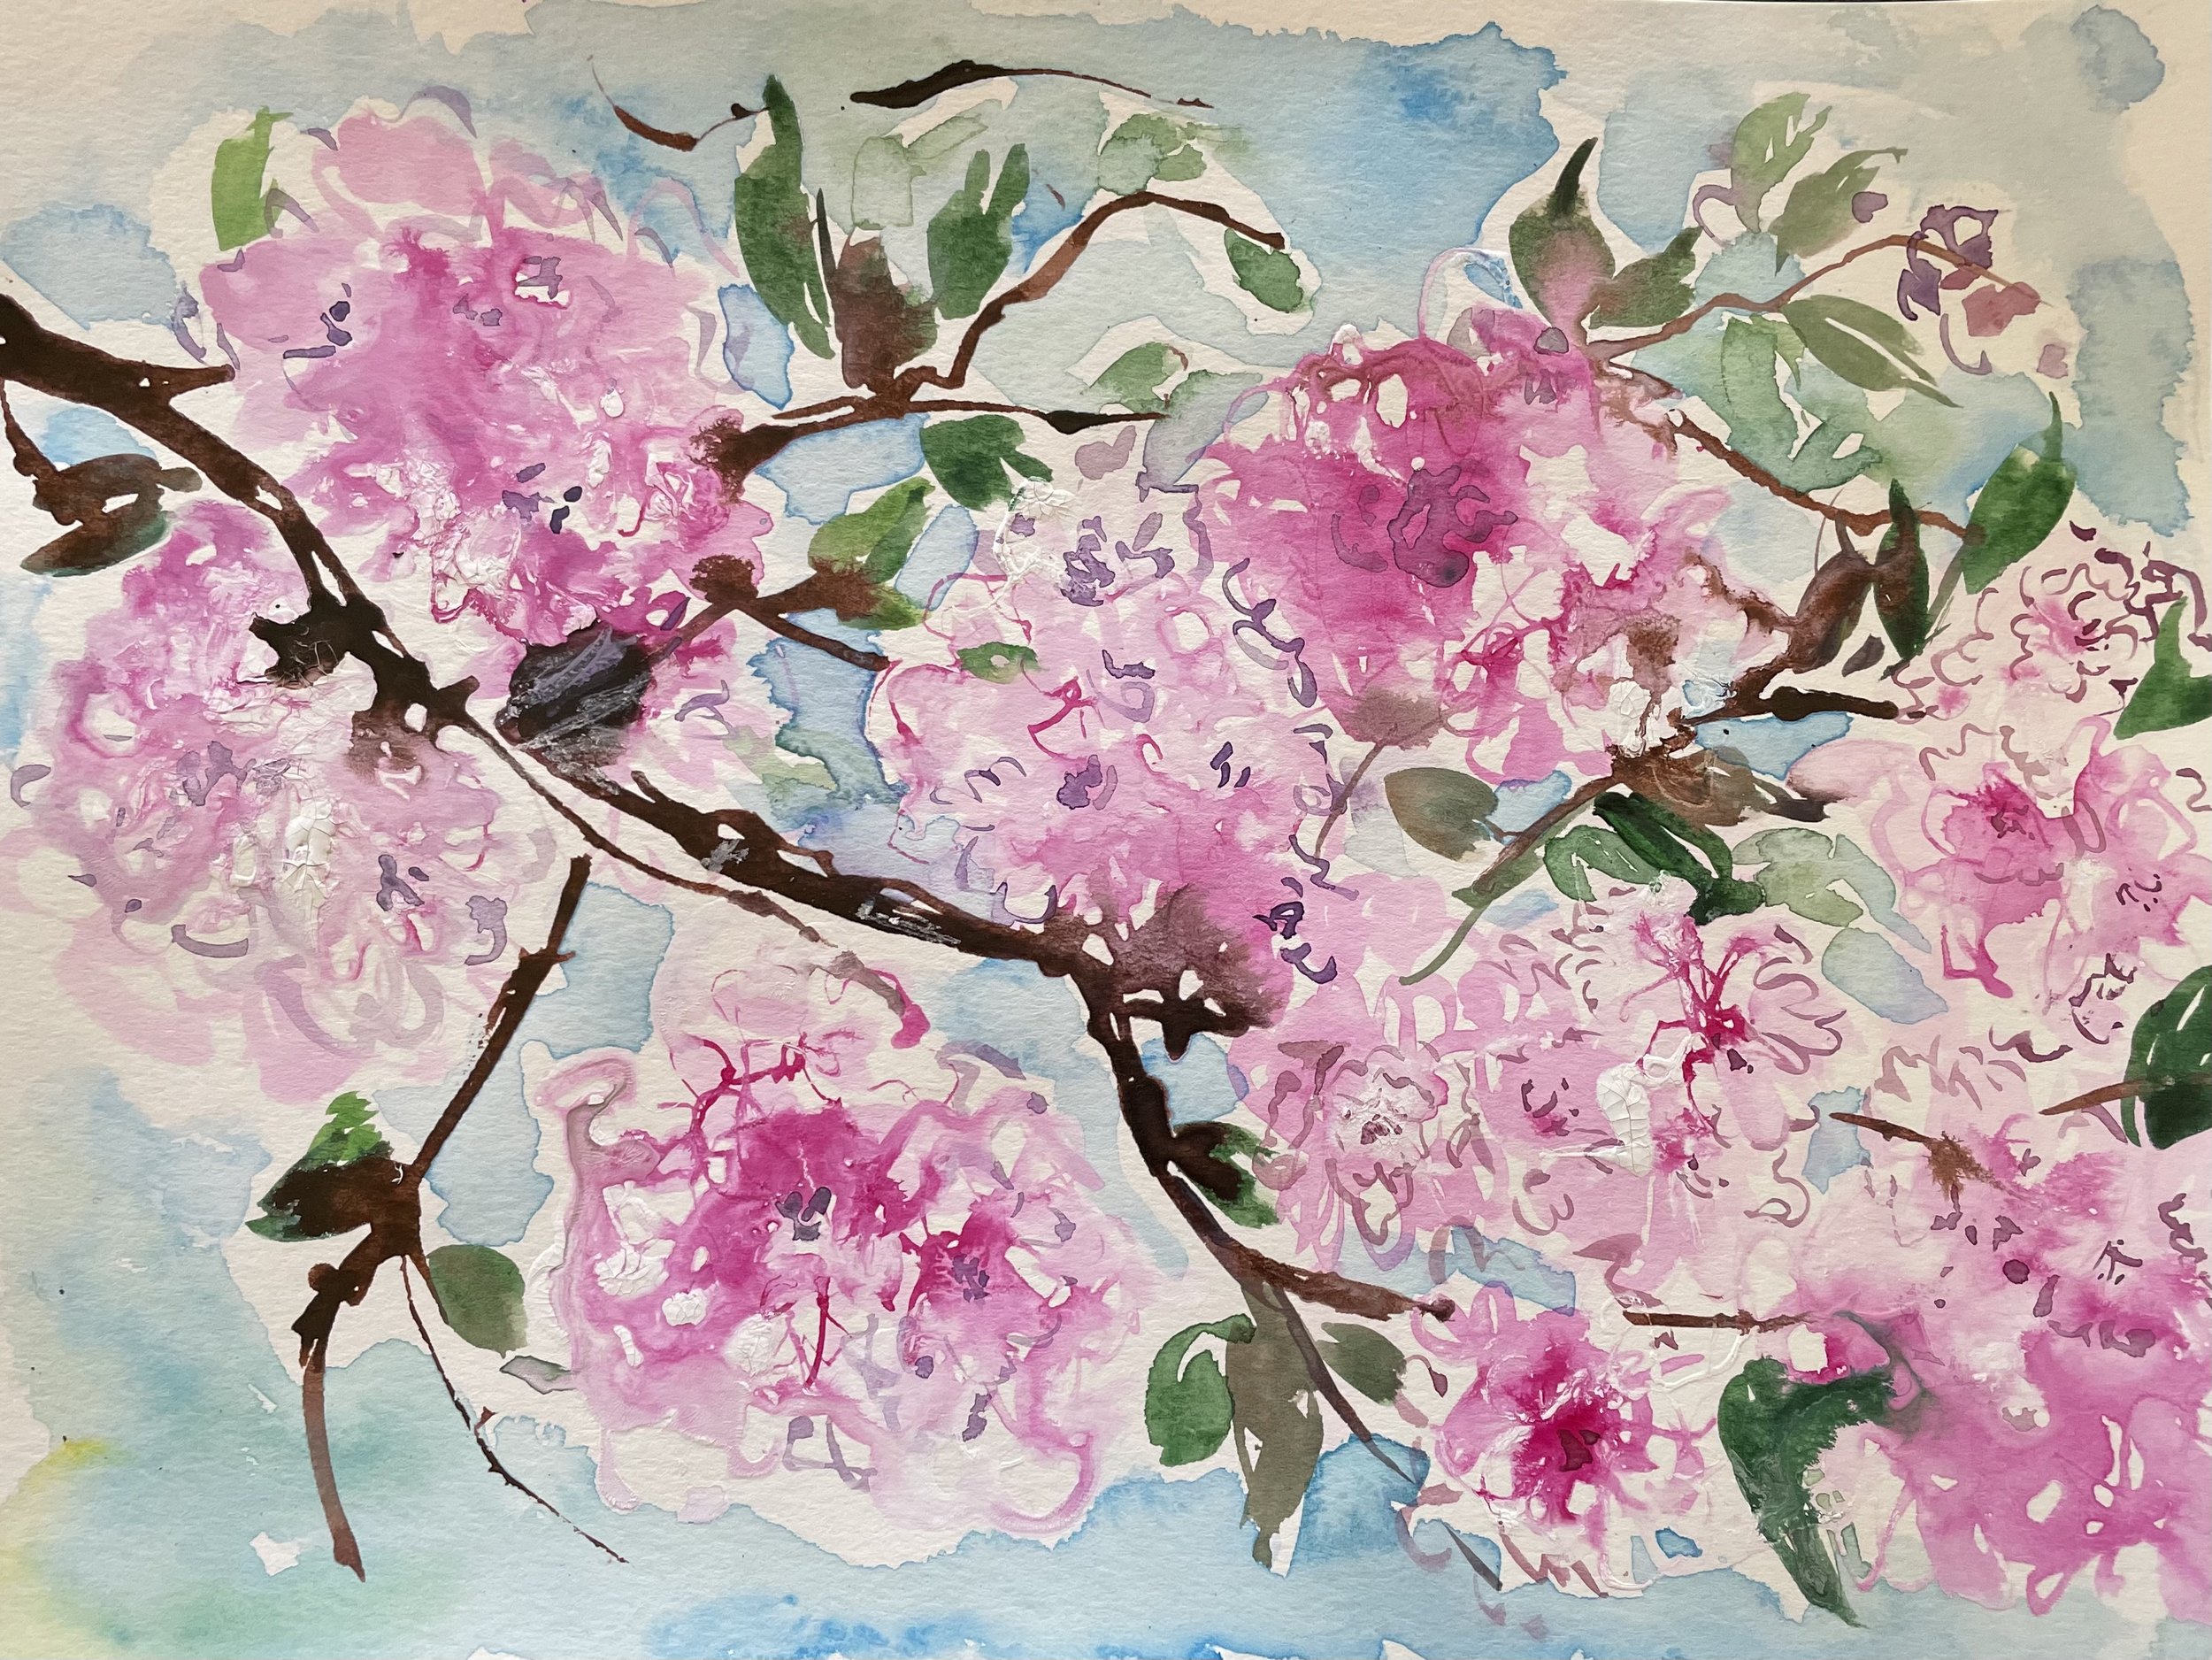 Floral 47 (Cherry Blossom), watercolor, 9*7", $ 150